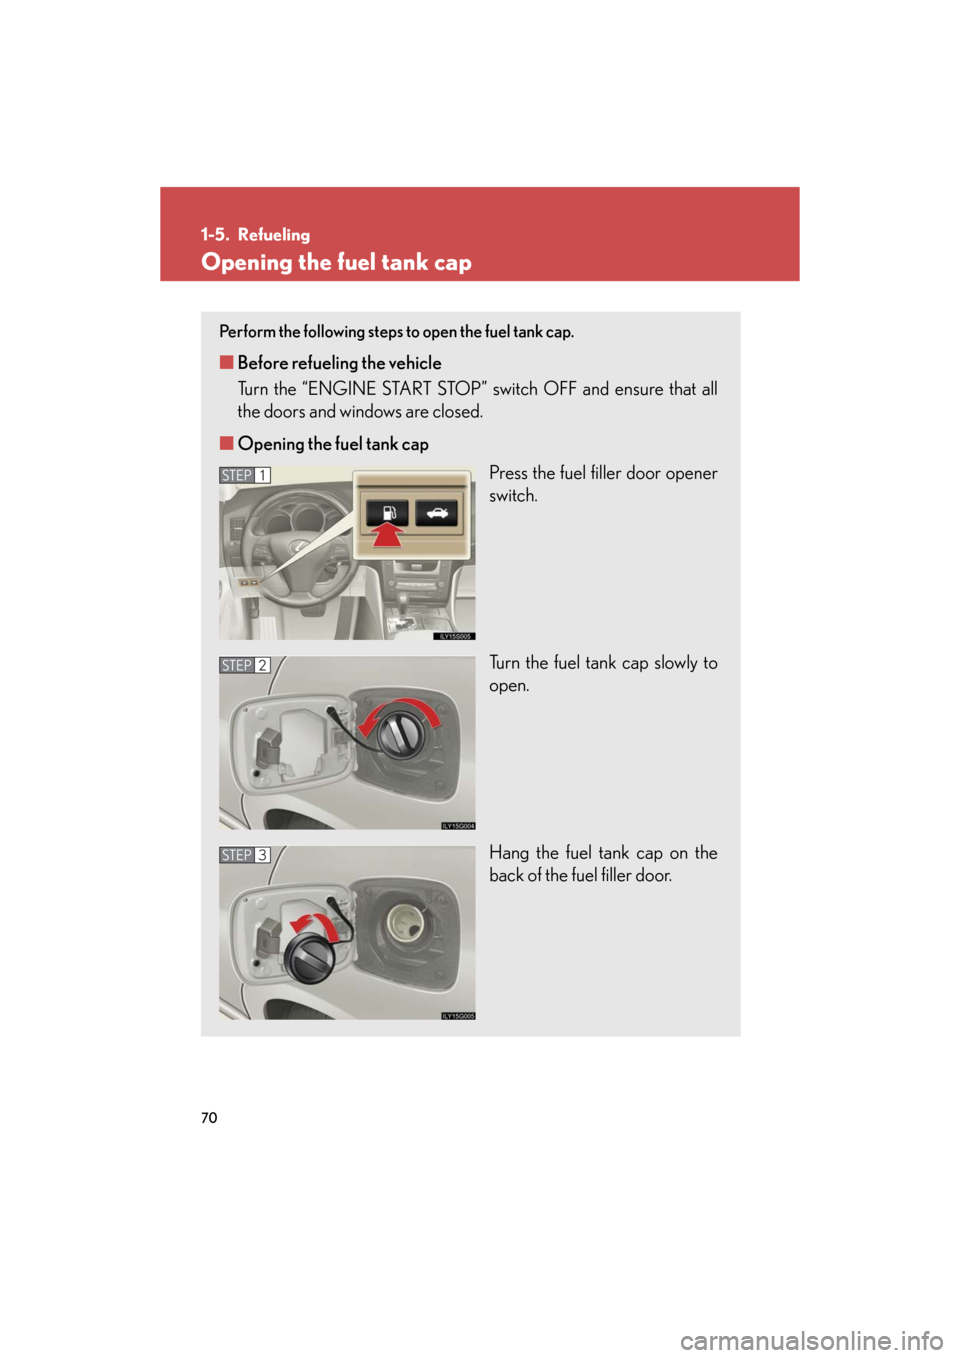 Lexus GS350 2008  Do-it-yourself maintenance / LEXUS 2008 GS460/350  (OM30A87U) Repair Manual 70
GS_G_U
May 13, 2008 5:14 pm
1-5. Refueling
Opening the fuel tank cap
Perform the following steps to open the fuel tank cap. 
■Before refueling the vehicle
Turn the “ENGINE START STOP” sw itch